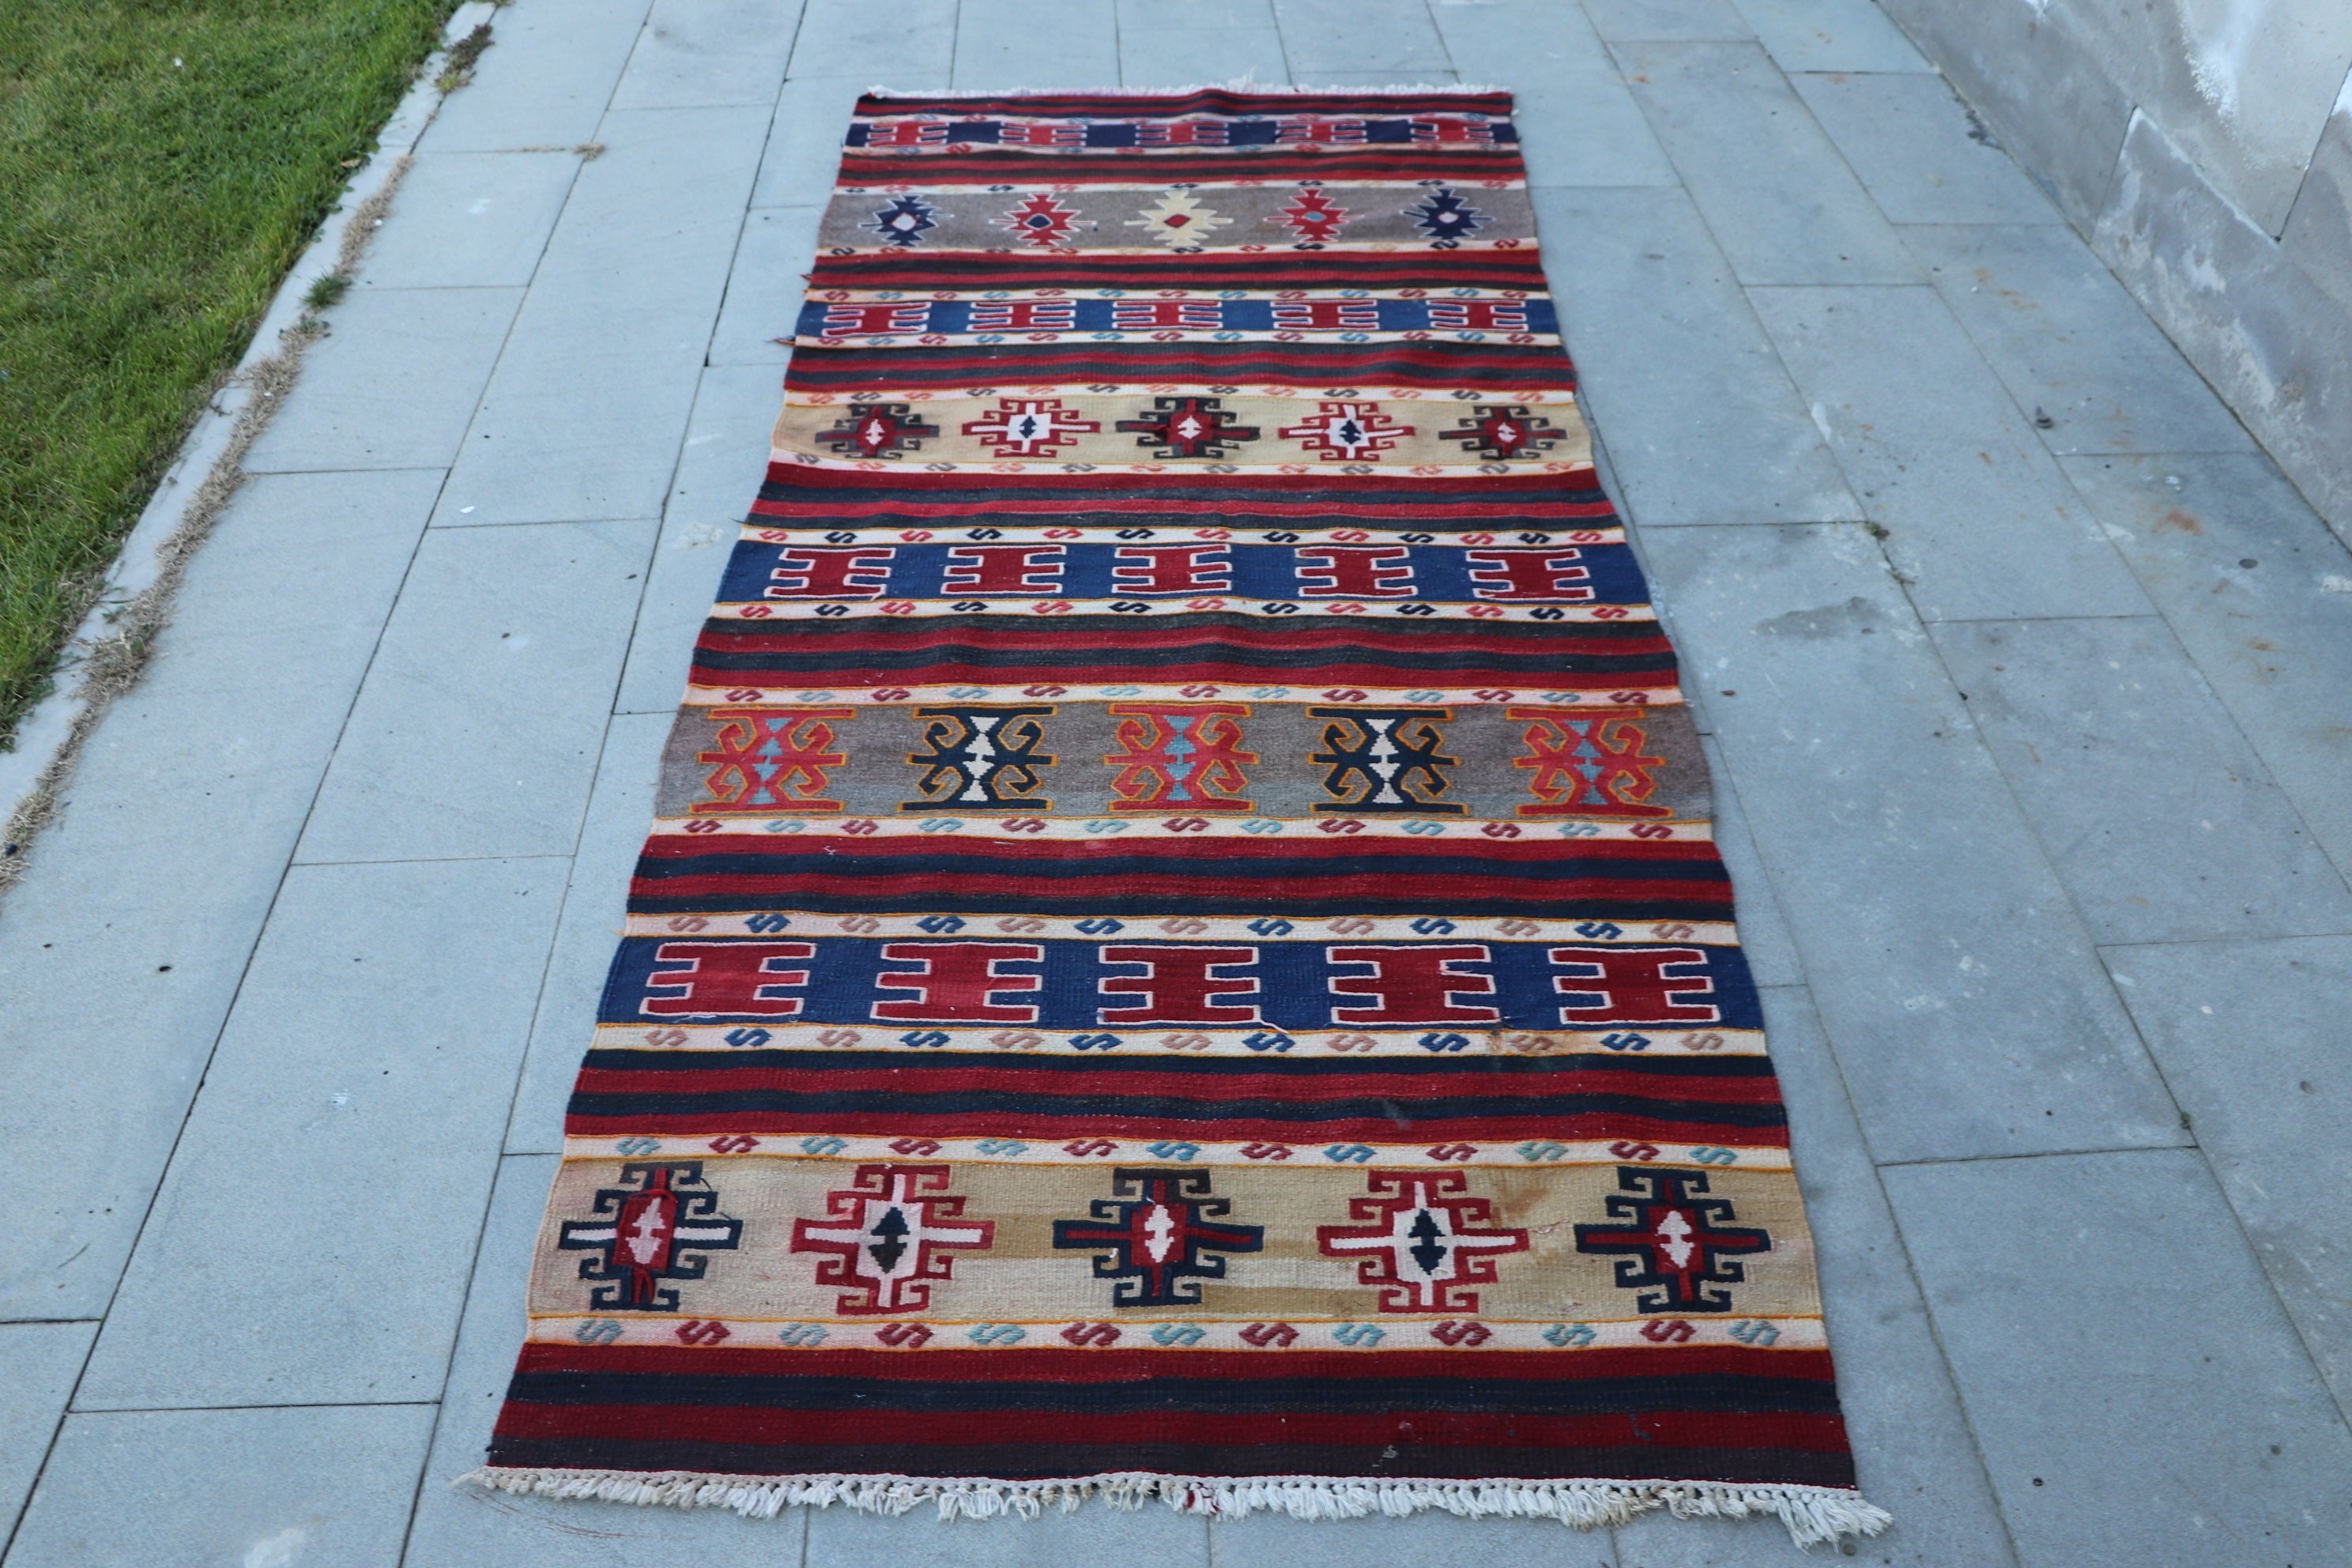 Kitchen Rug, 3.6x8.6 ft Area Rug, Home Decor Rugs, Vintage Rugs, Turkish Rug, Red Oriental Rugs, Dining Room Rugs, Kilim, Moroccan Rug